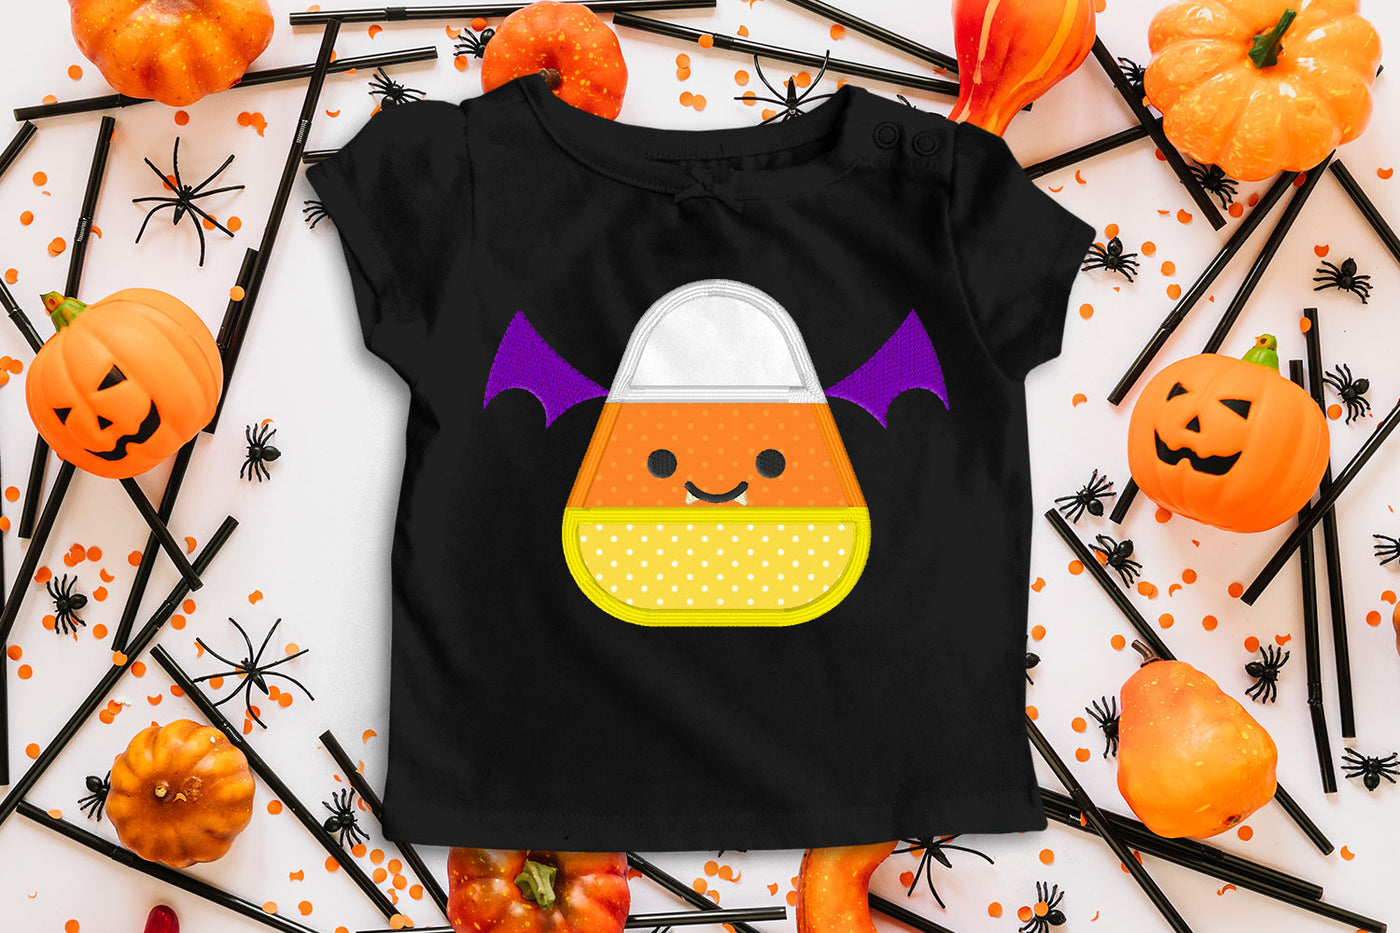 candy corn dressed up as vampire bat applique embroidery design file